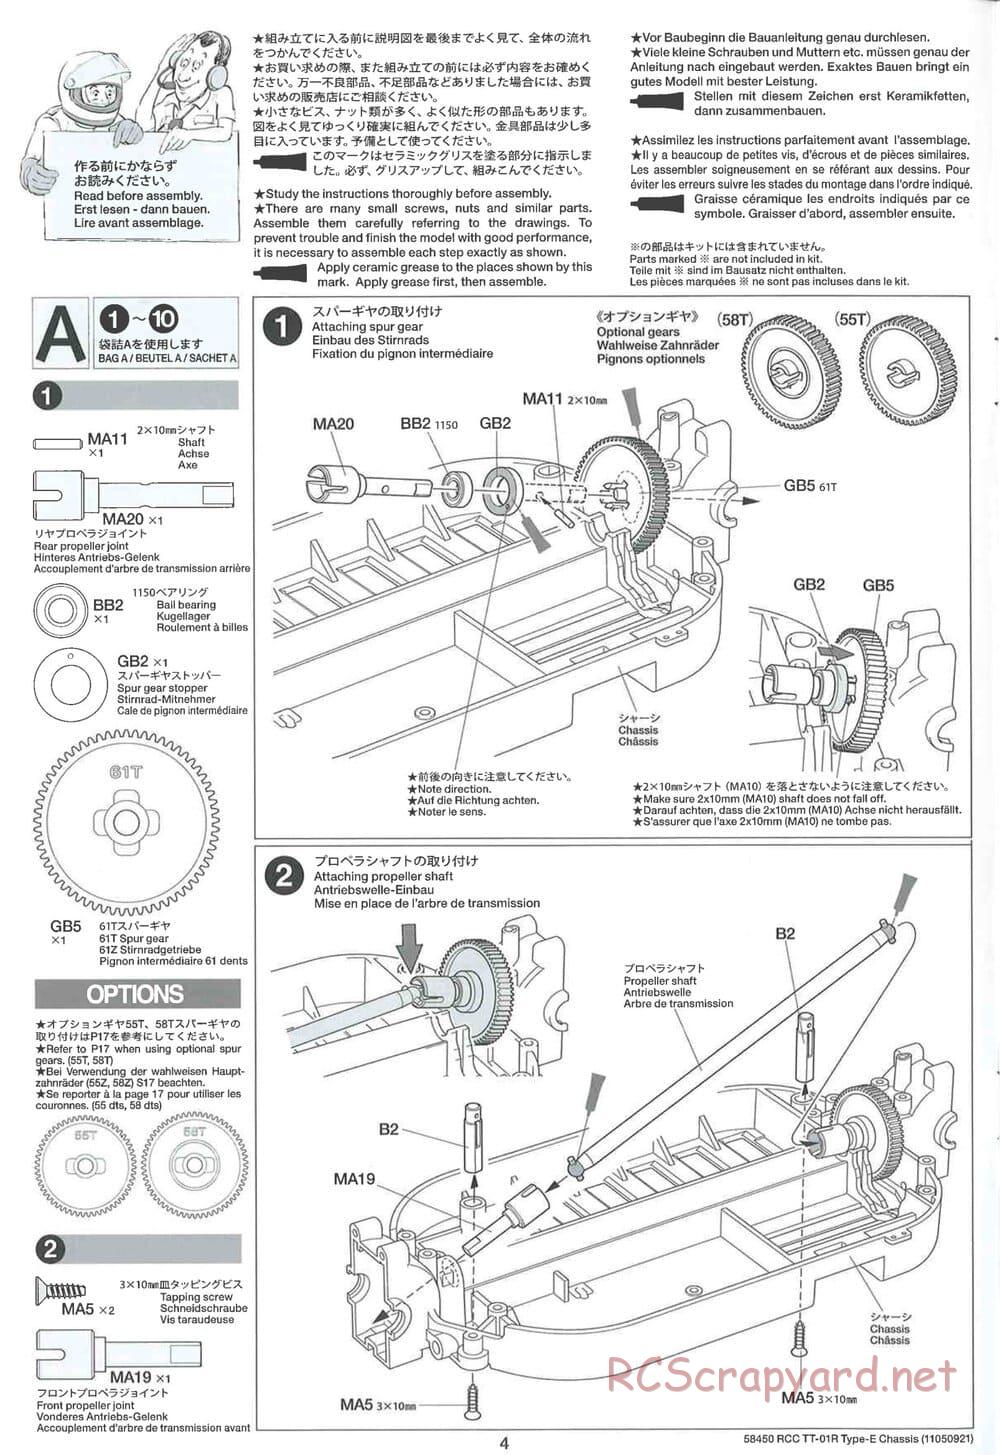 Tamiya - TT-01R Type-E Chassis - Manual - Page 4